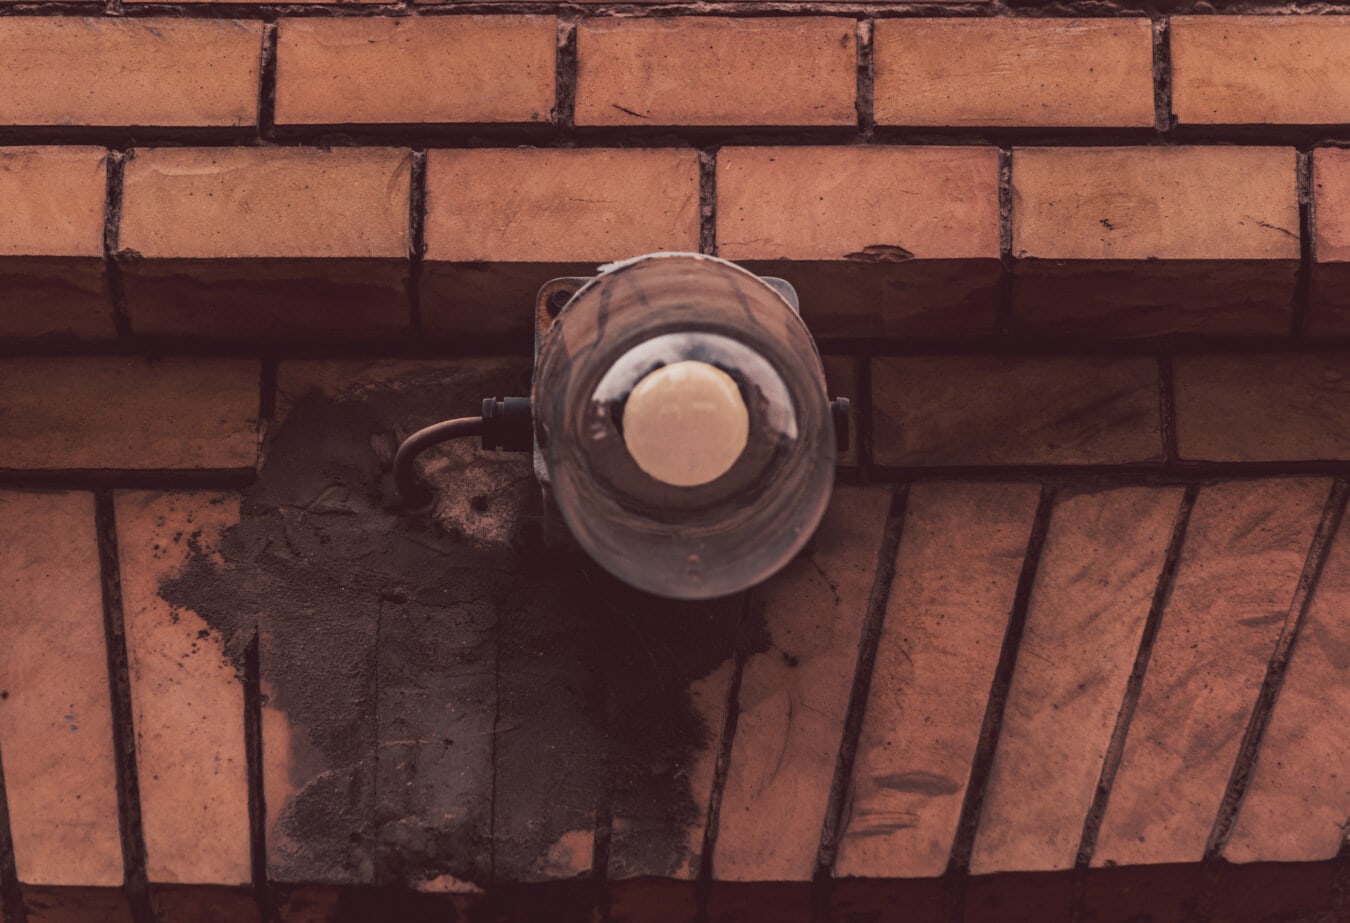 light bulb, historic, old style, wire, wall, bricks, old, vintage, dirty, retro